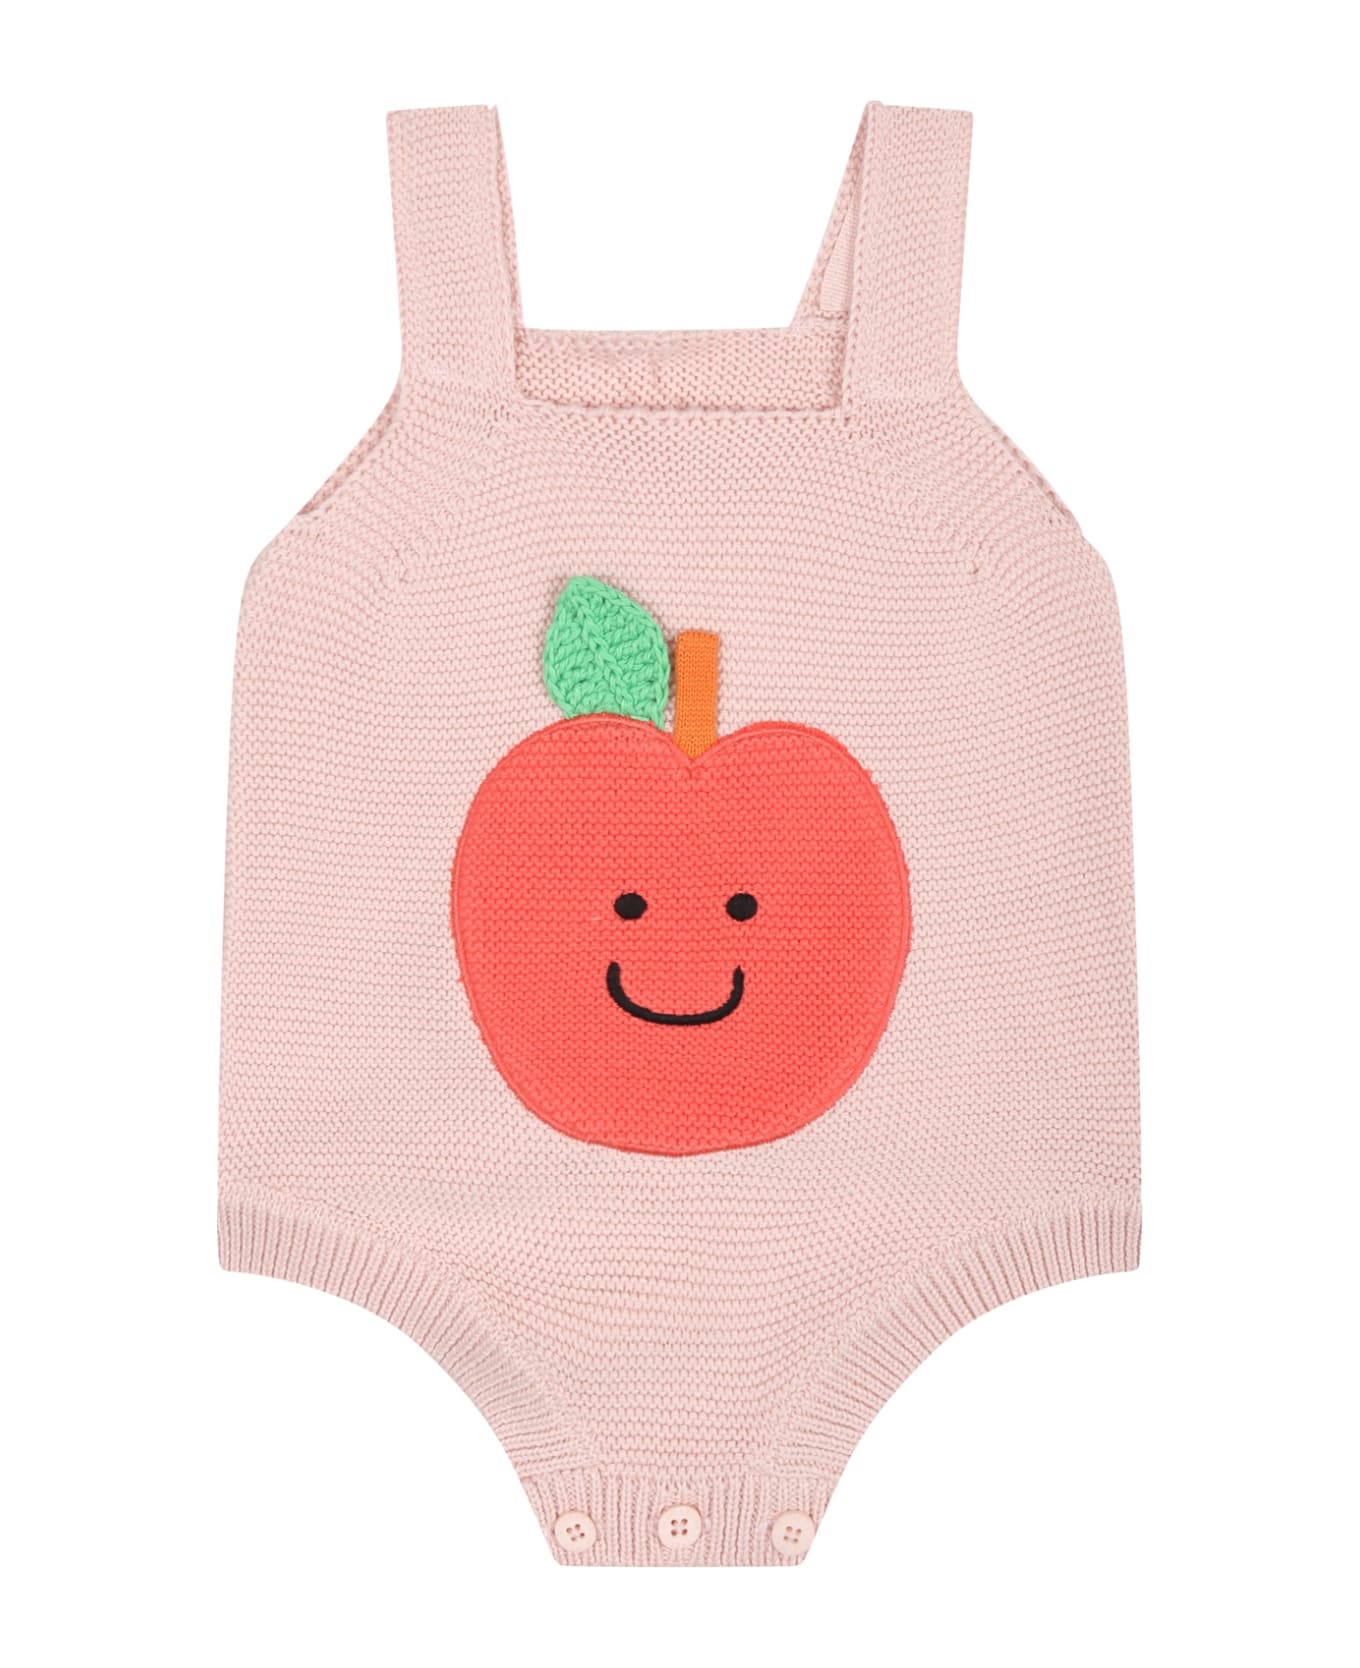 Stella McCartney Kids Pink Bodysuit For Baby Girl With Apple - Pink ボディスーツ＆セットアップ